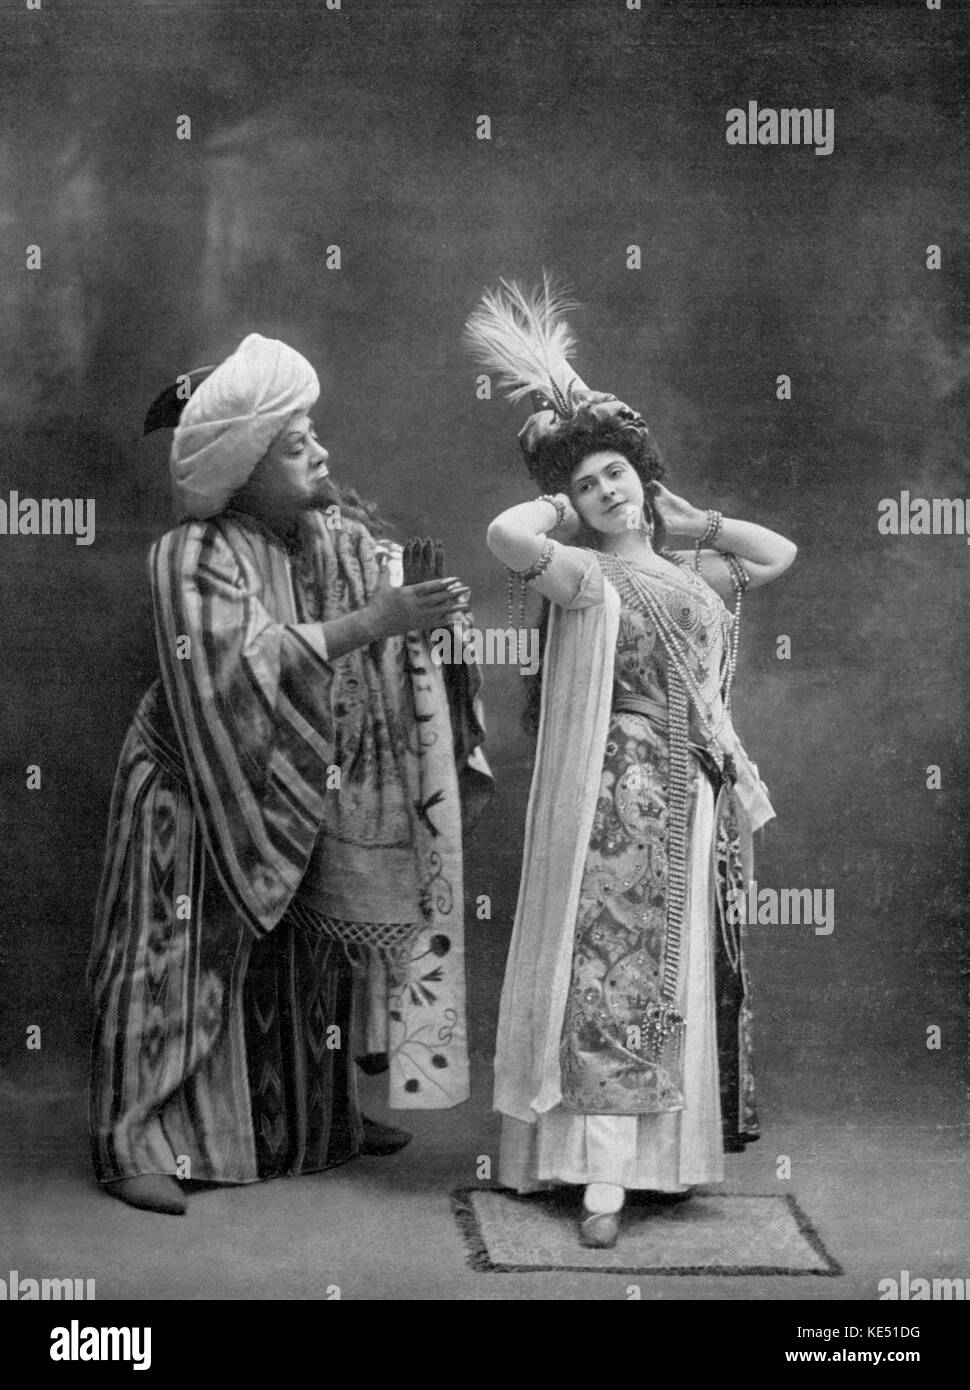 Lucien Fugére as the Devil and Jean-Louise Tiphaine as Fiamina in Act II of Jules Massenet 's opera Grisélidis Premiered at the Opéra -Comique, Paris, France. 20 November 1901.  JM: French composer, 12 May 1842 - 13 August 1912 LF: Franch Baritone, 22 July 1848 - 15 January 1935 JLT: French soprano, 20 Aug 1873 - Sep 1958 Stock Photo